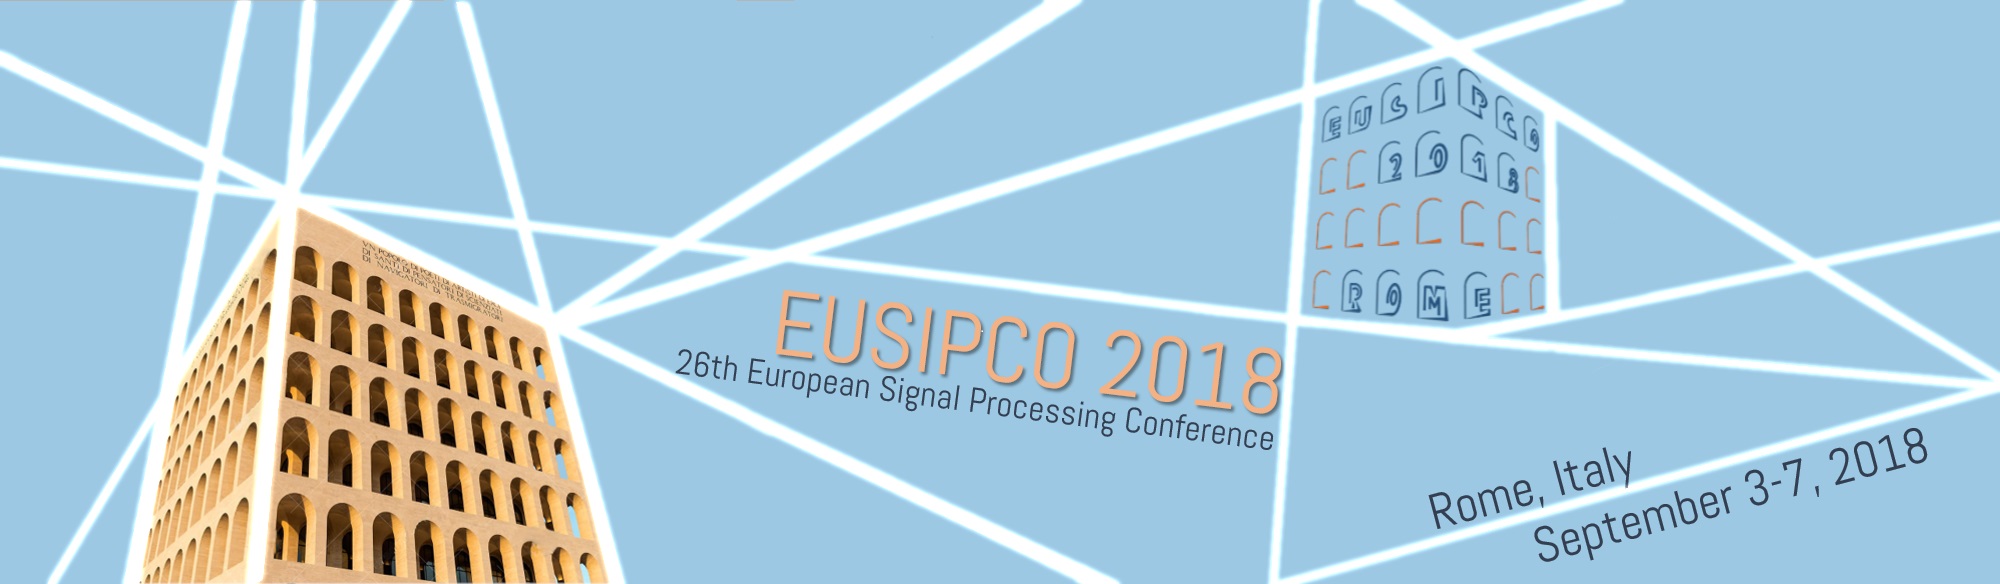 European Signal Processing Conference